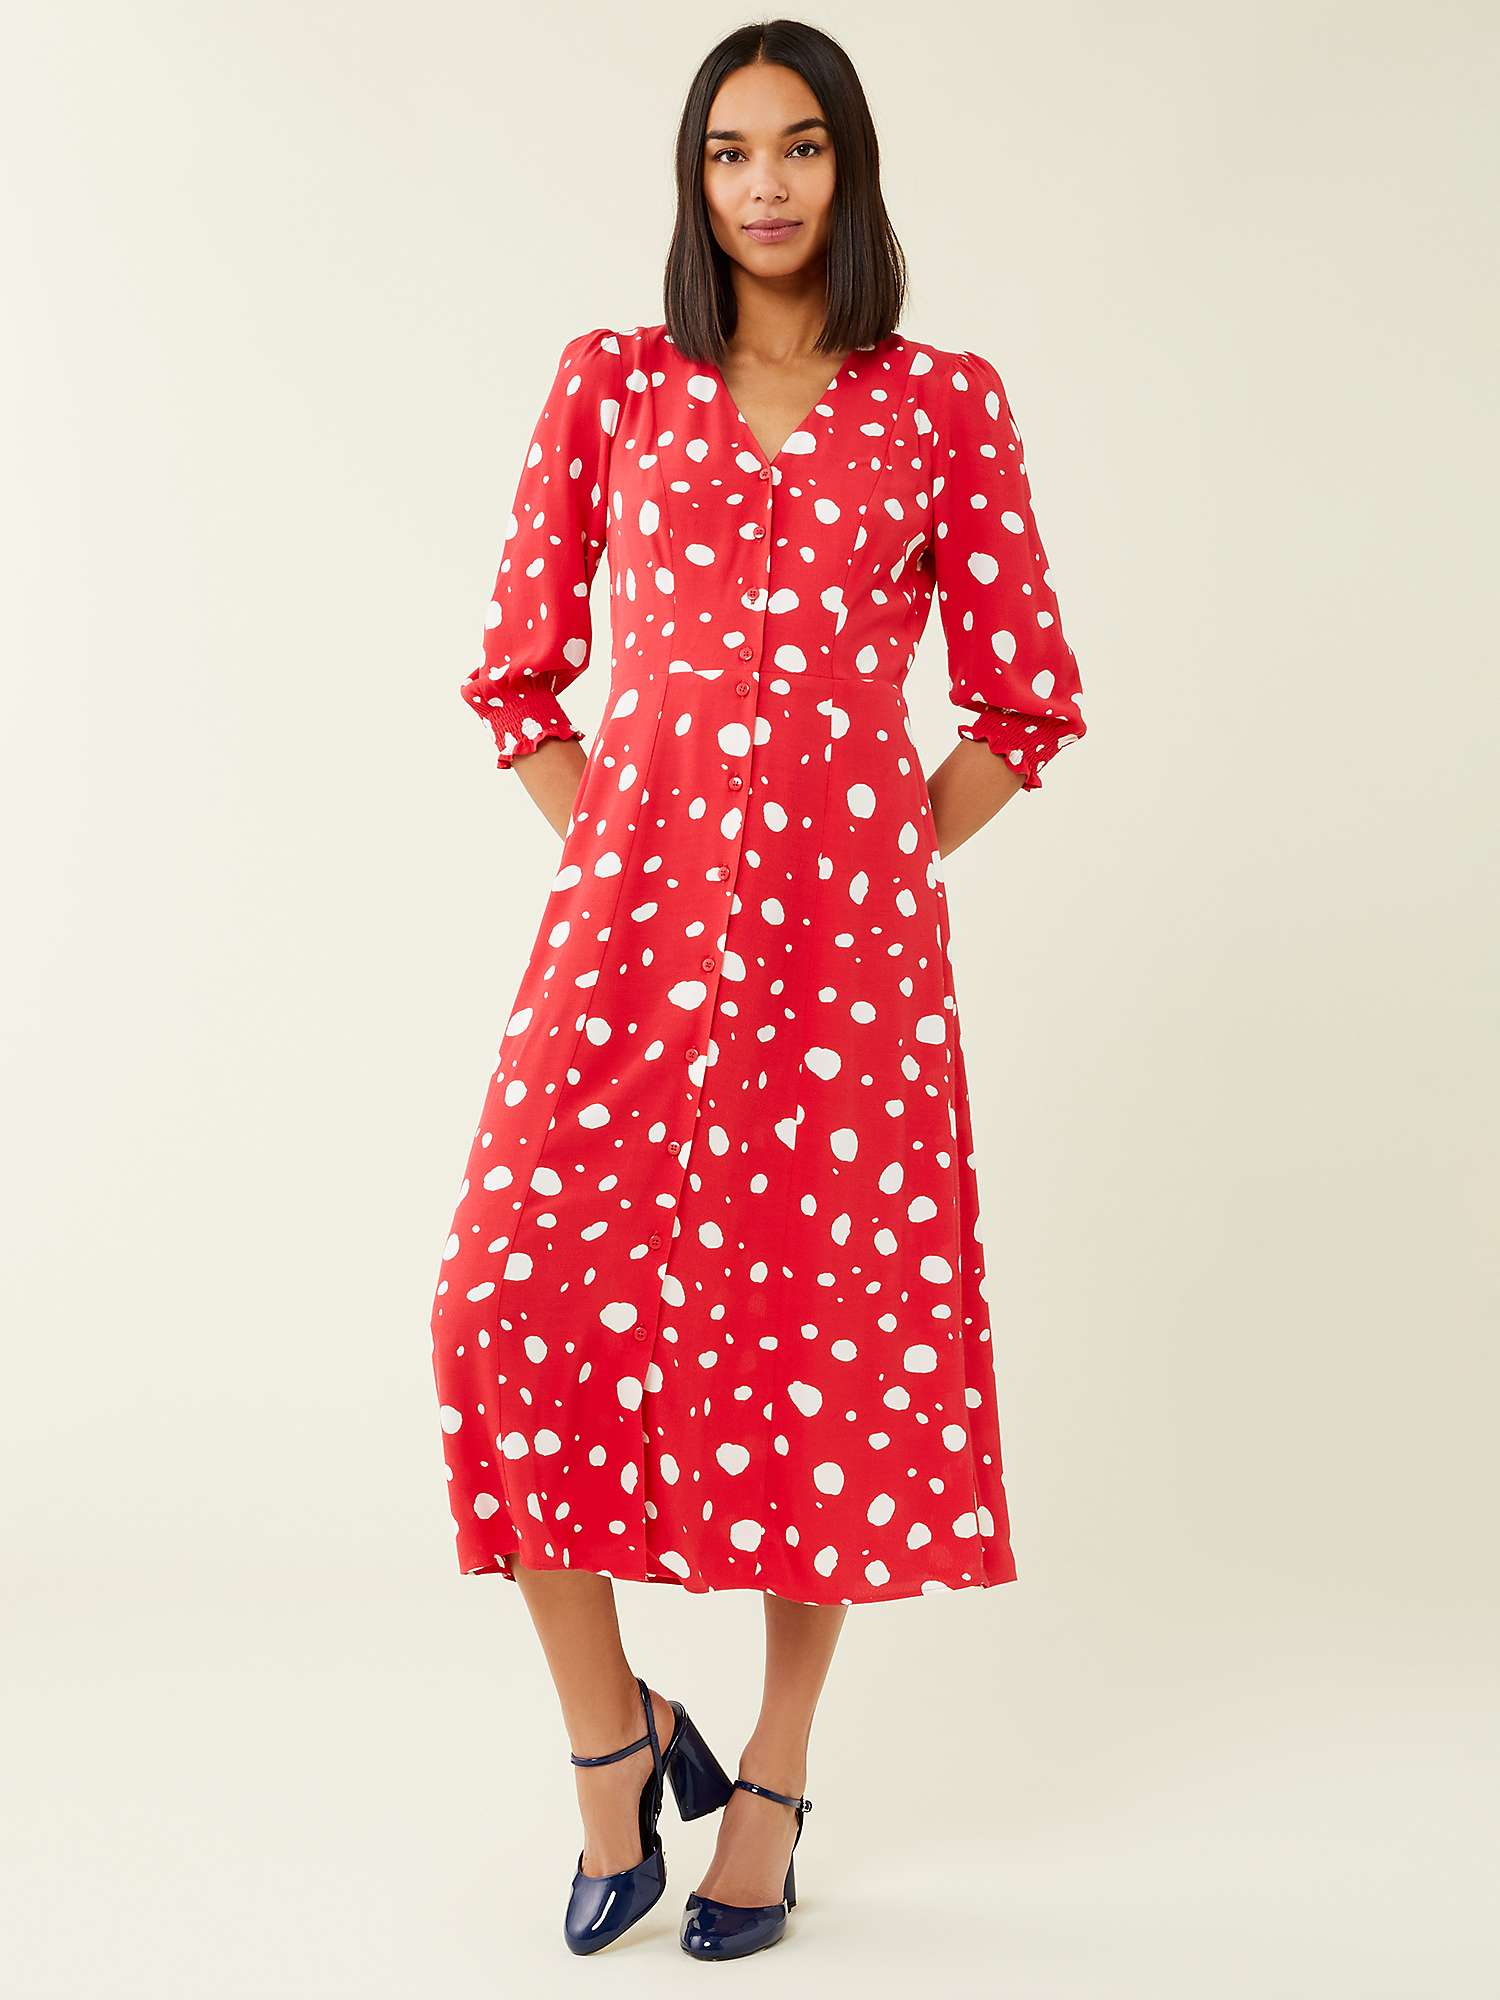 Finery Normal Spot Print Midi Dress, Red/White at John Lewis & Partners